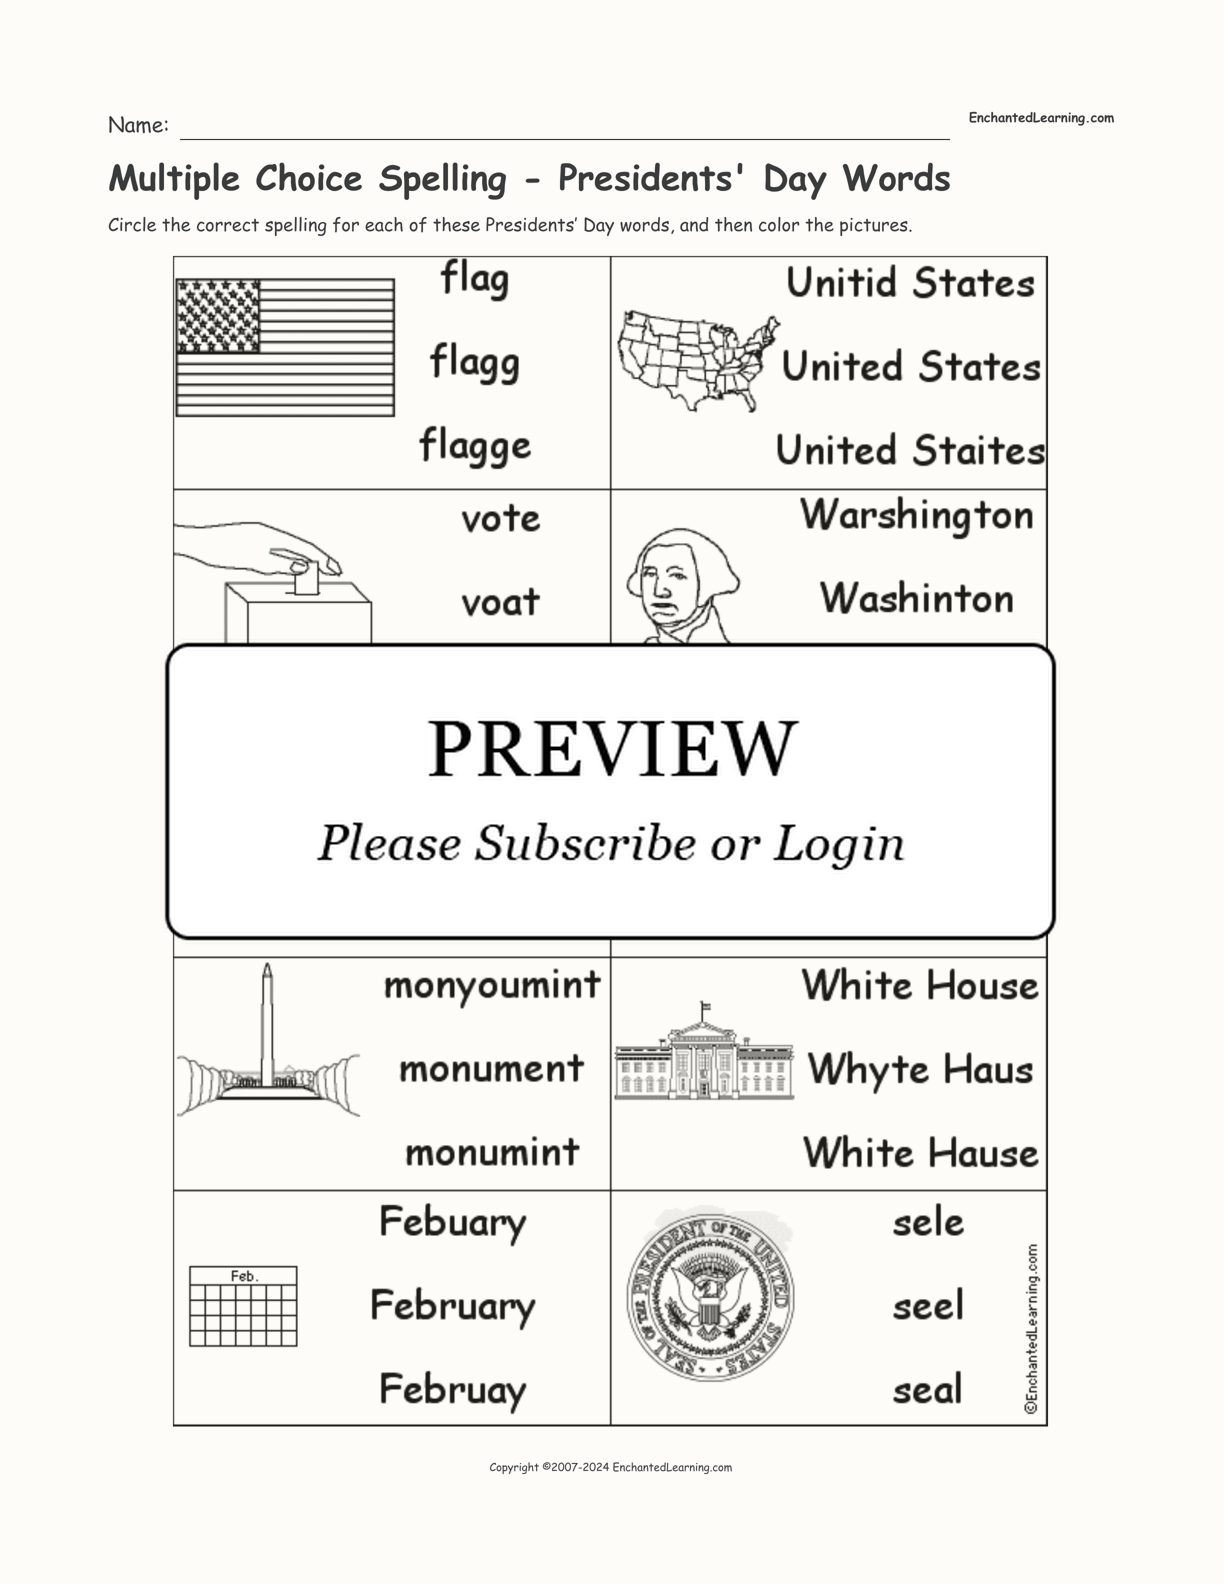 Multiple Choice Spelling -  Presidents' Day Words interactive worksheet page 1